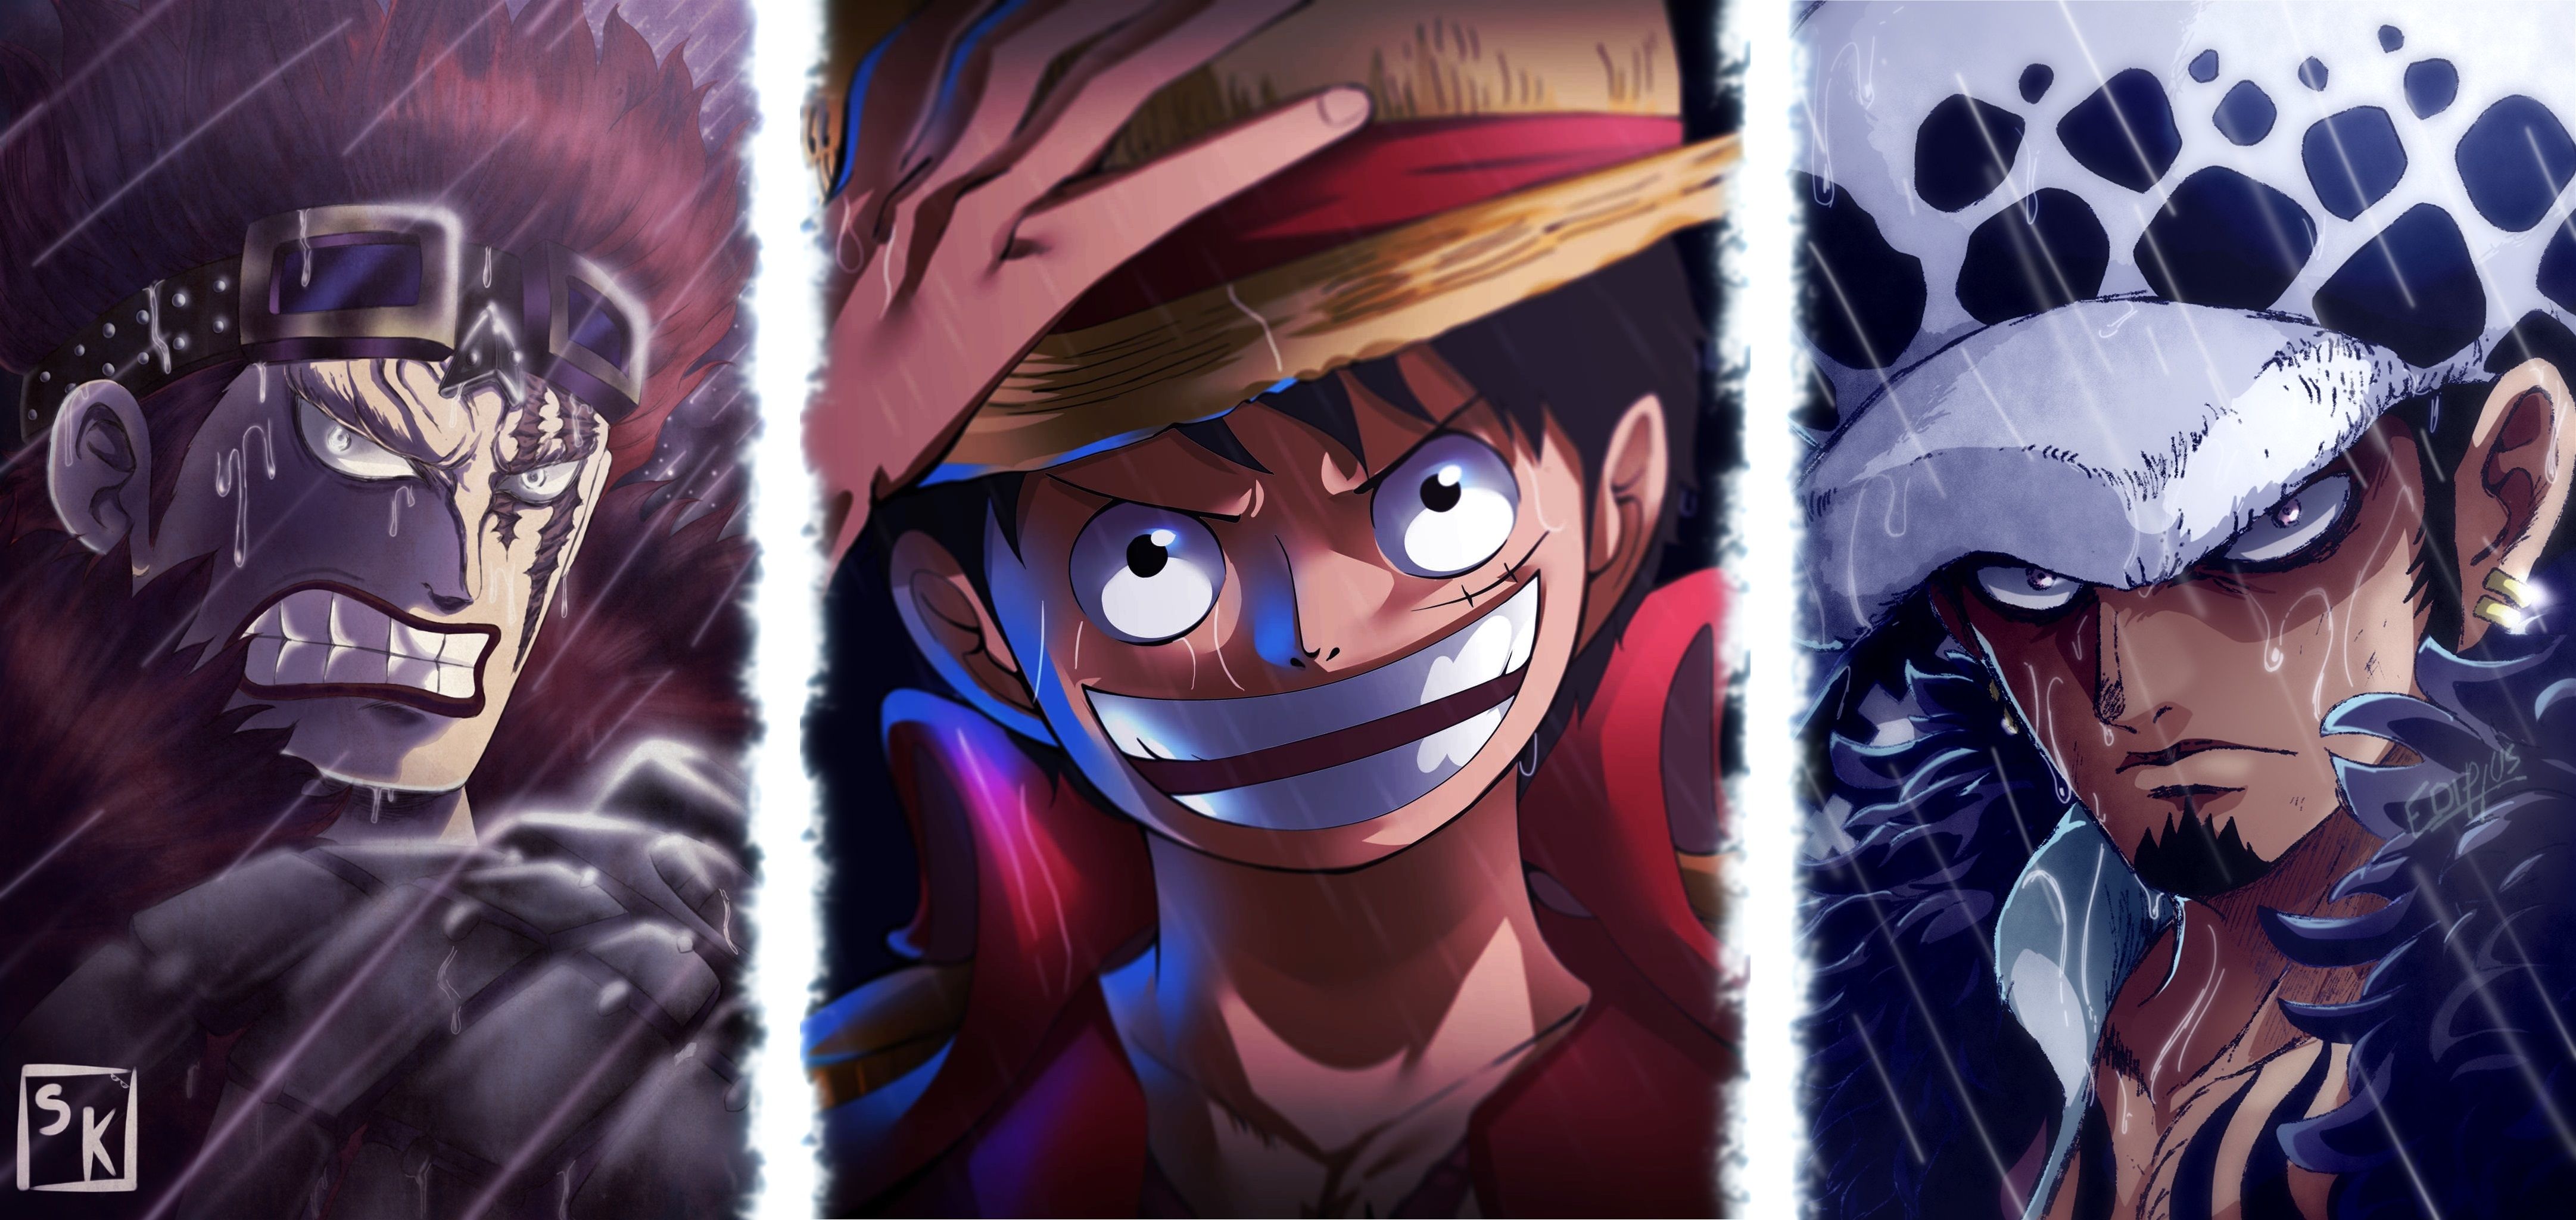 One Piece Team Art 1080P Laptop Full HD Wallpaper, HD Anime 4K Wallpaper, Image, Photo and Background